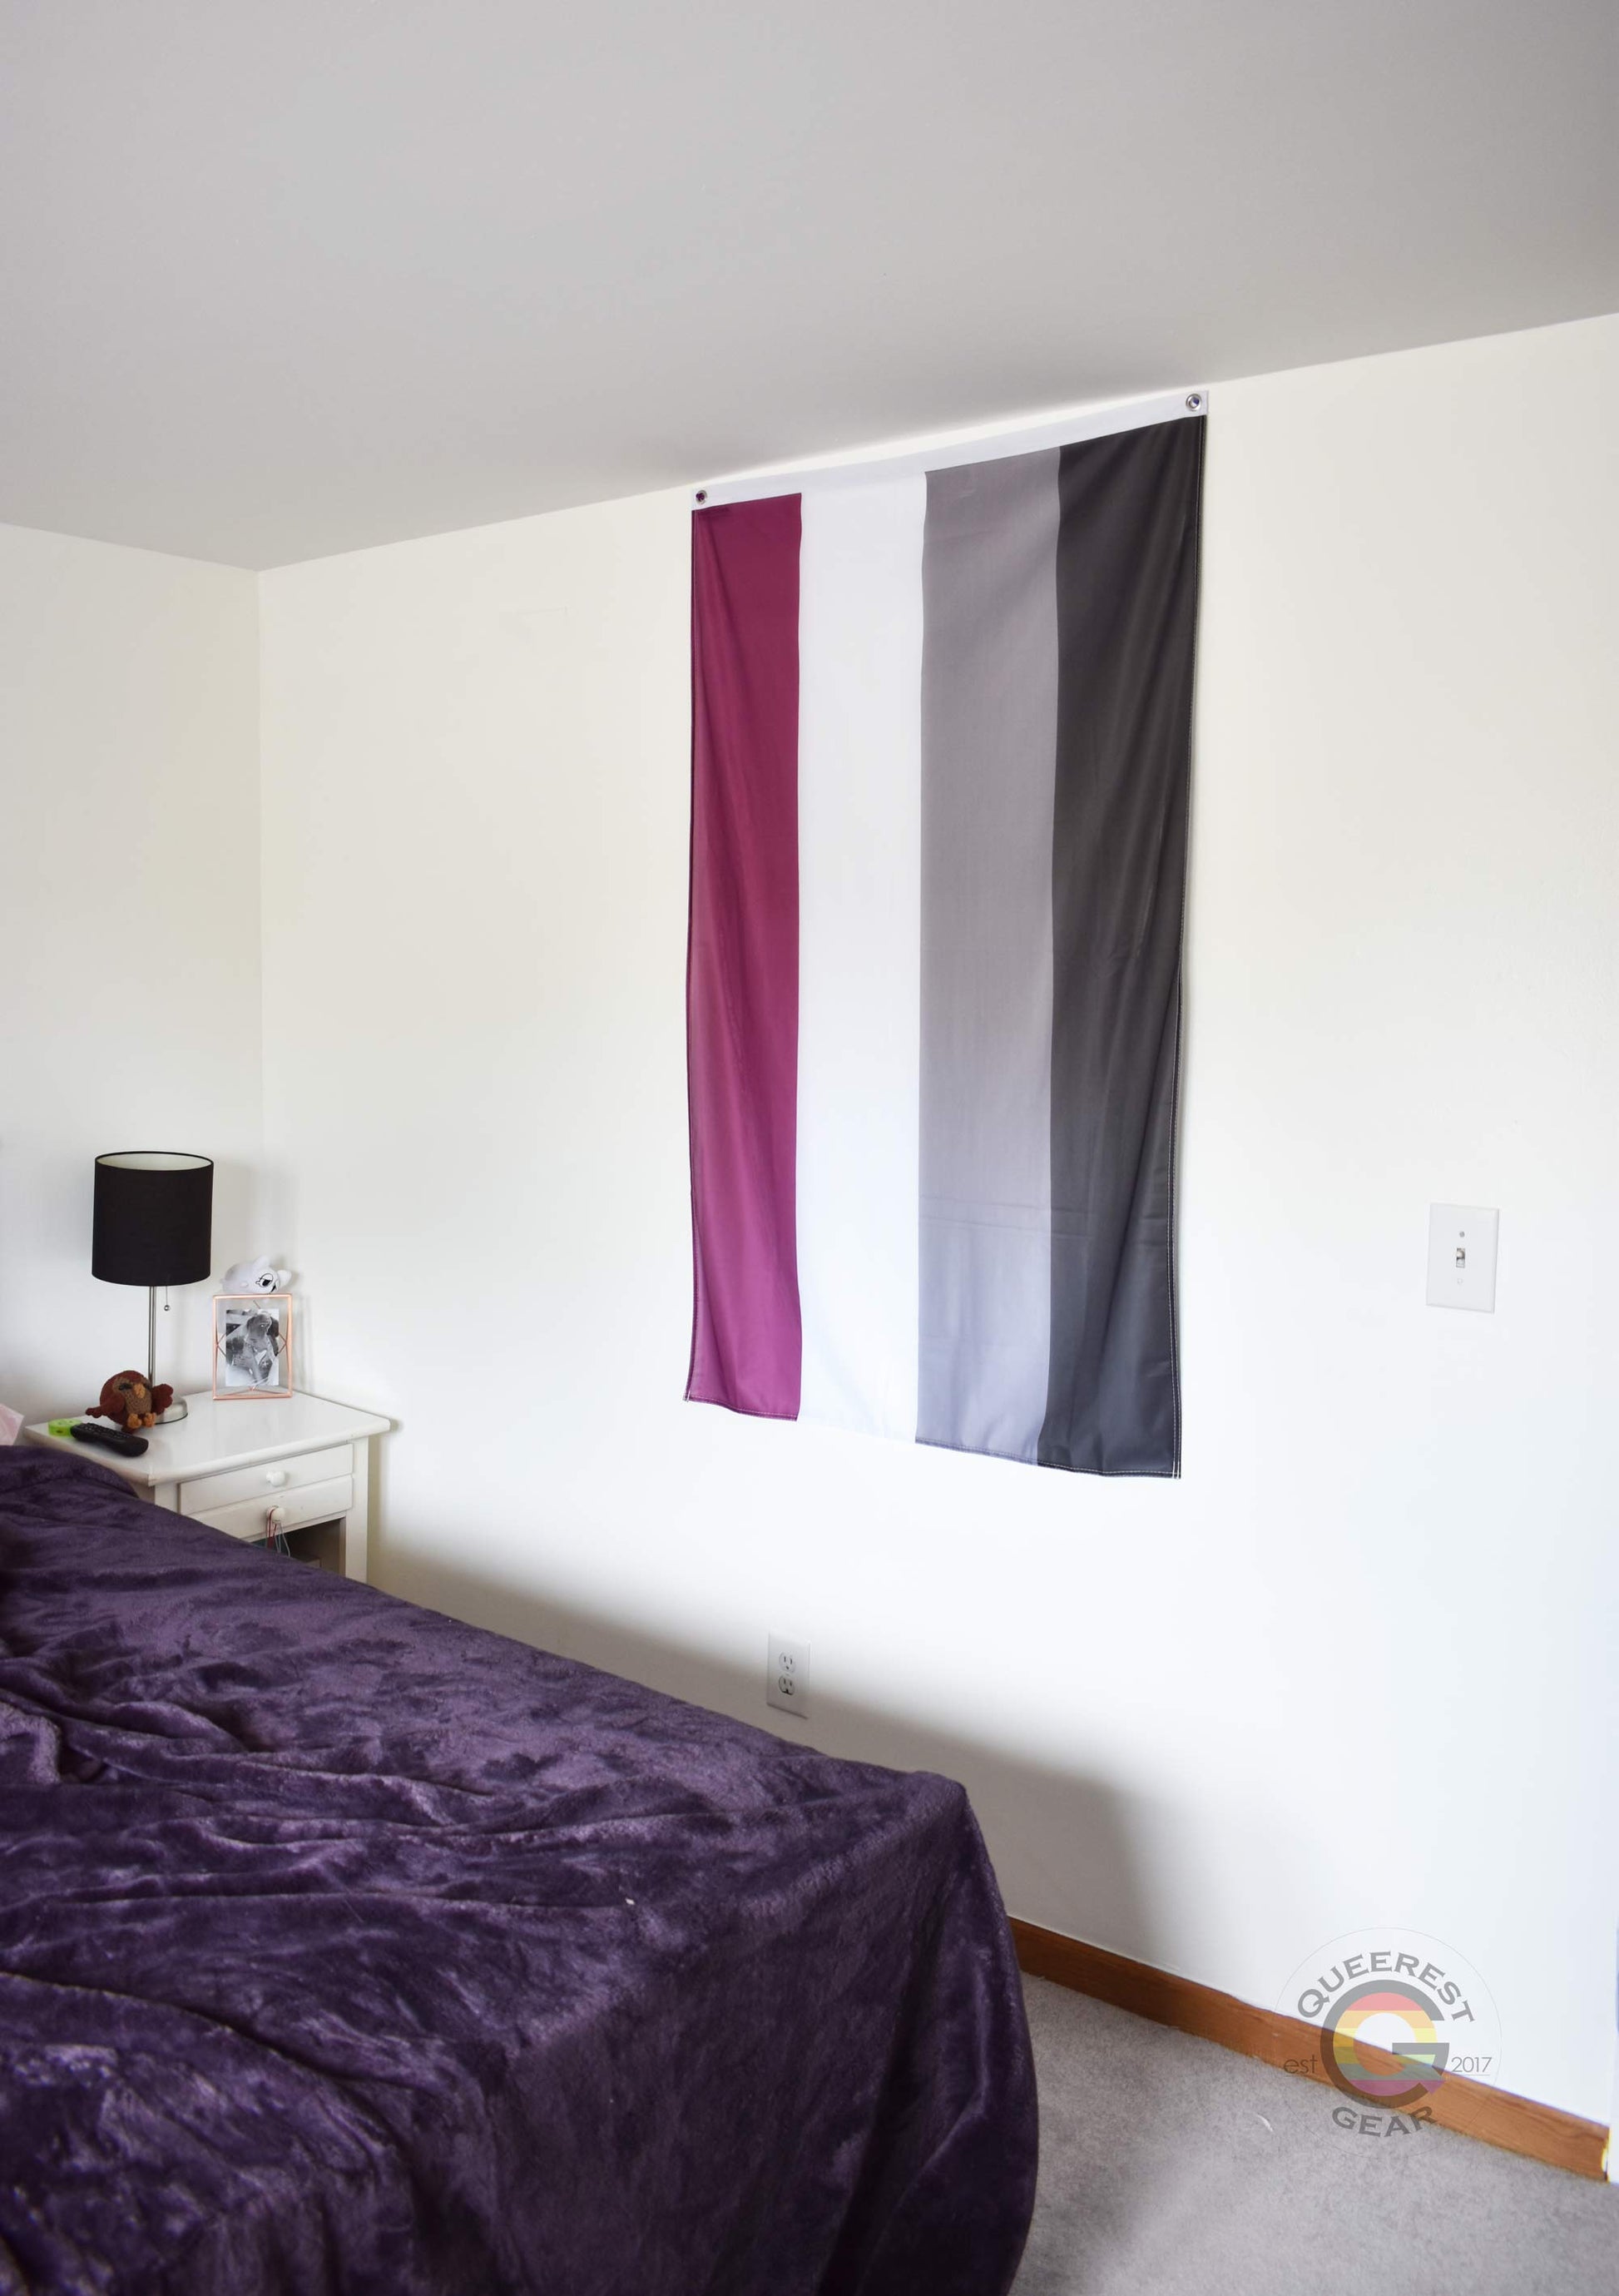 3’x5’ asexual pride flag hanging vertically on the wall of a bedroom with a nightstand and a bed